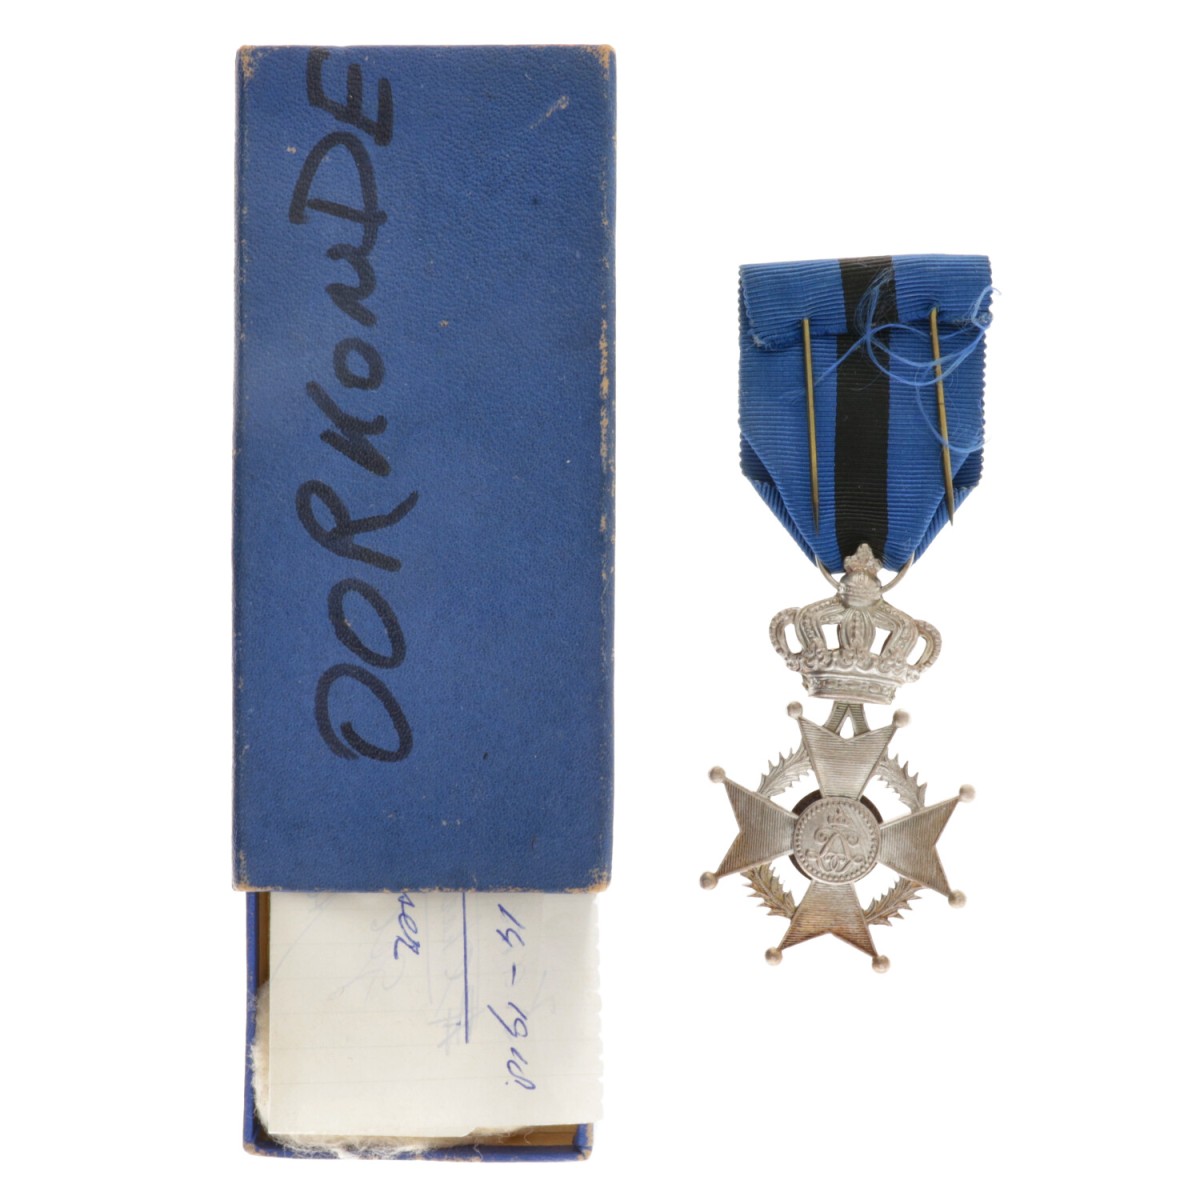 Belgium. First half of the 20th century. Knights' cross of the Order of Leopold II with crossed swords.